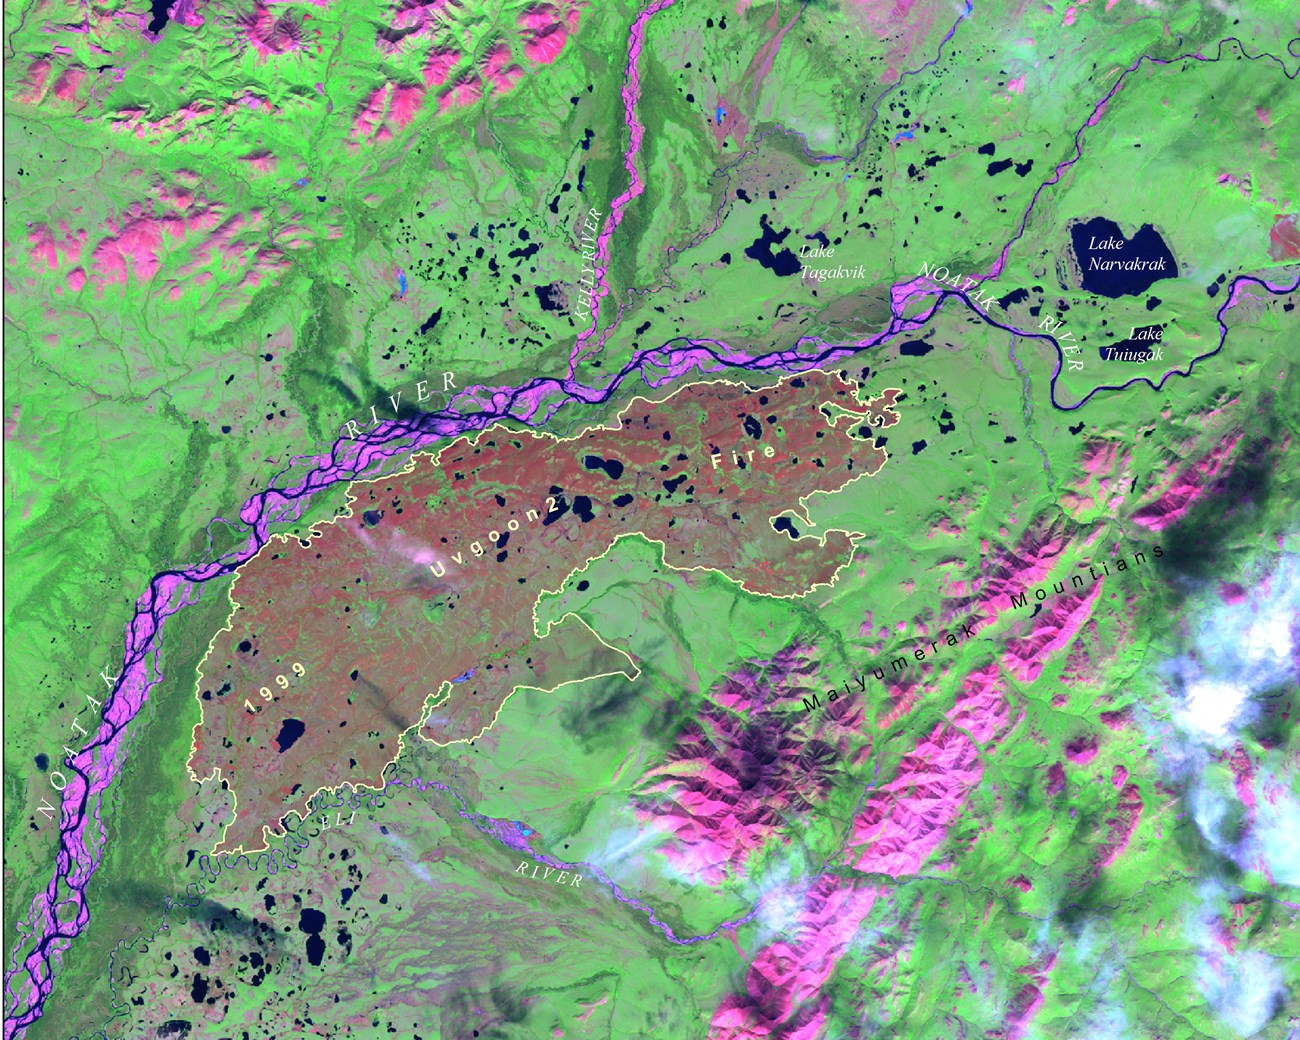 A glaringly bright satellite image with intense neon greens and fuchsia colors.